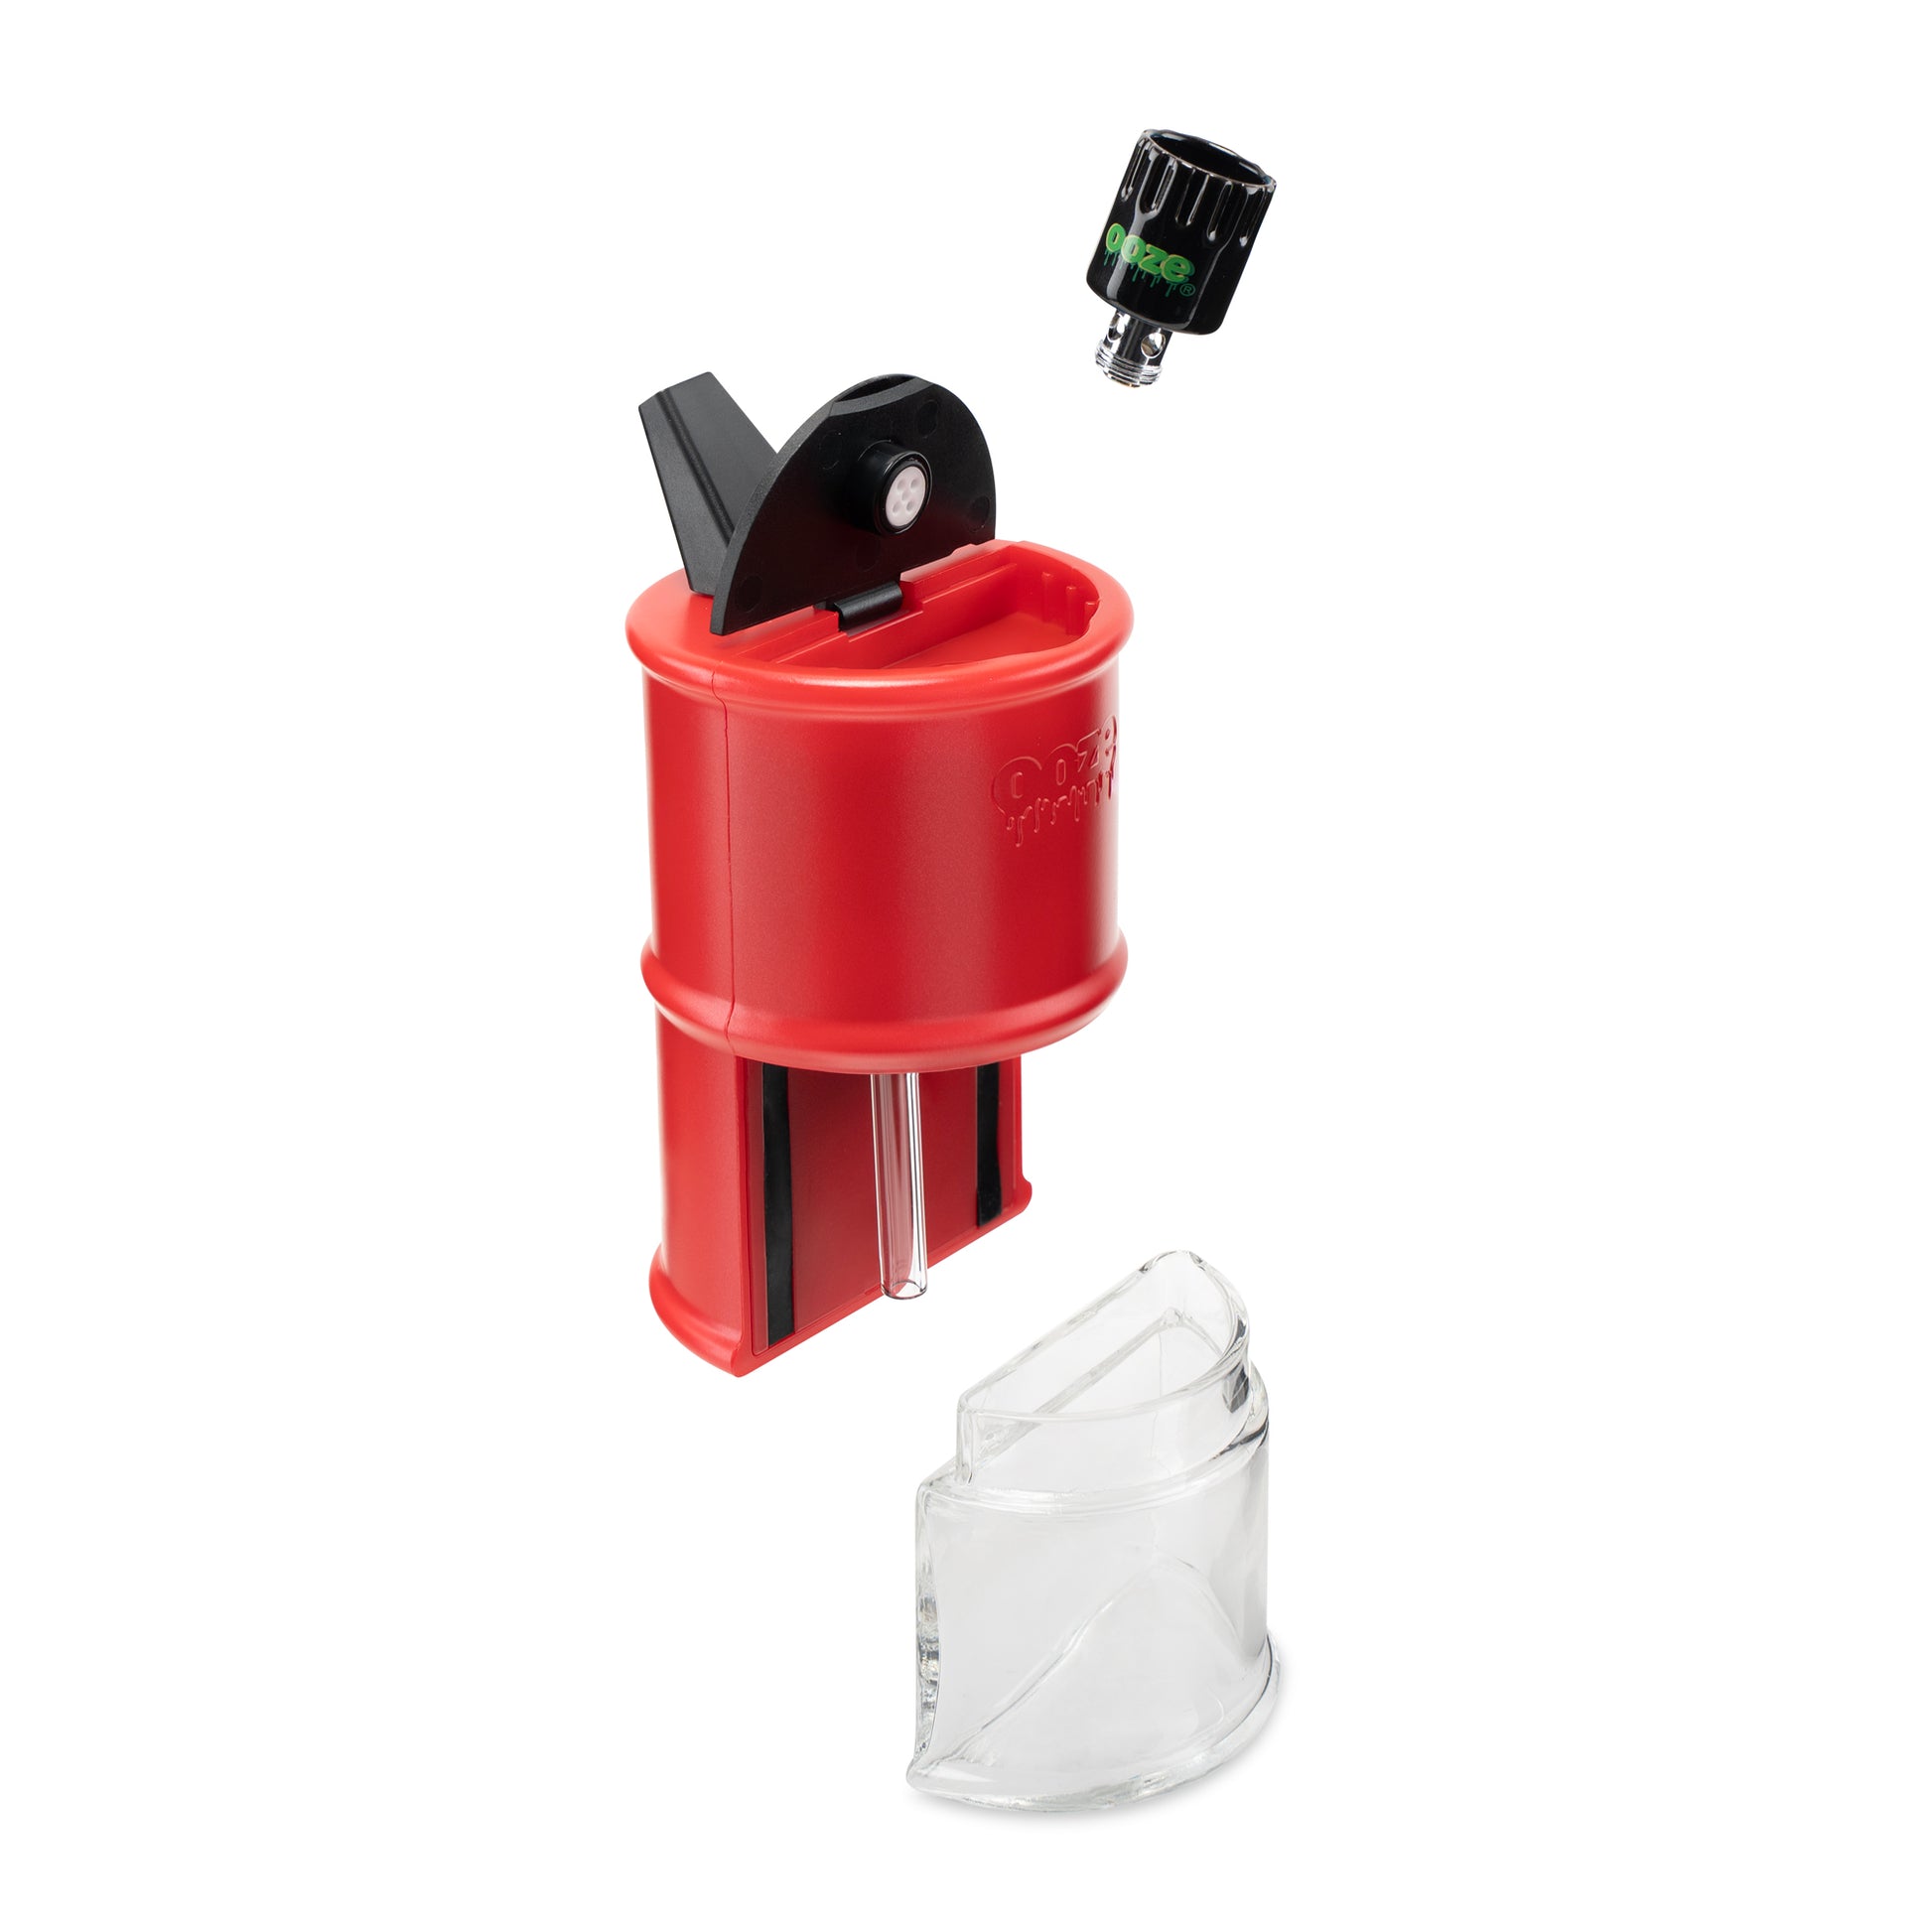 The Ruby Red Ooze Electro Barrel E-Rig is shown with all removable pieces disassembled. The water chamber and Onyx Atomizer are floating near the device and the lid is open.